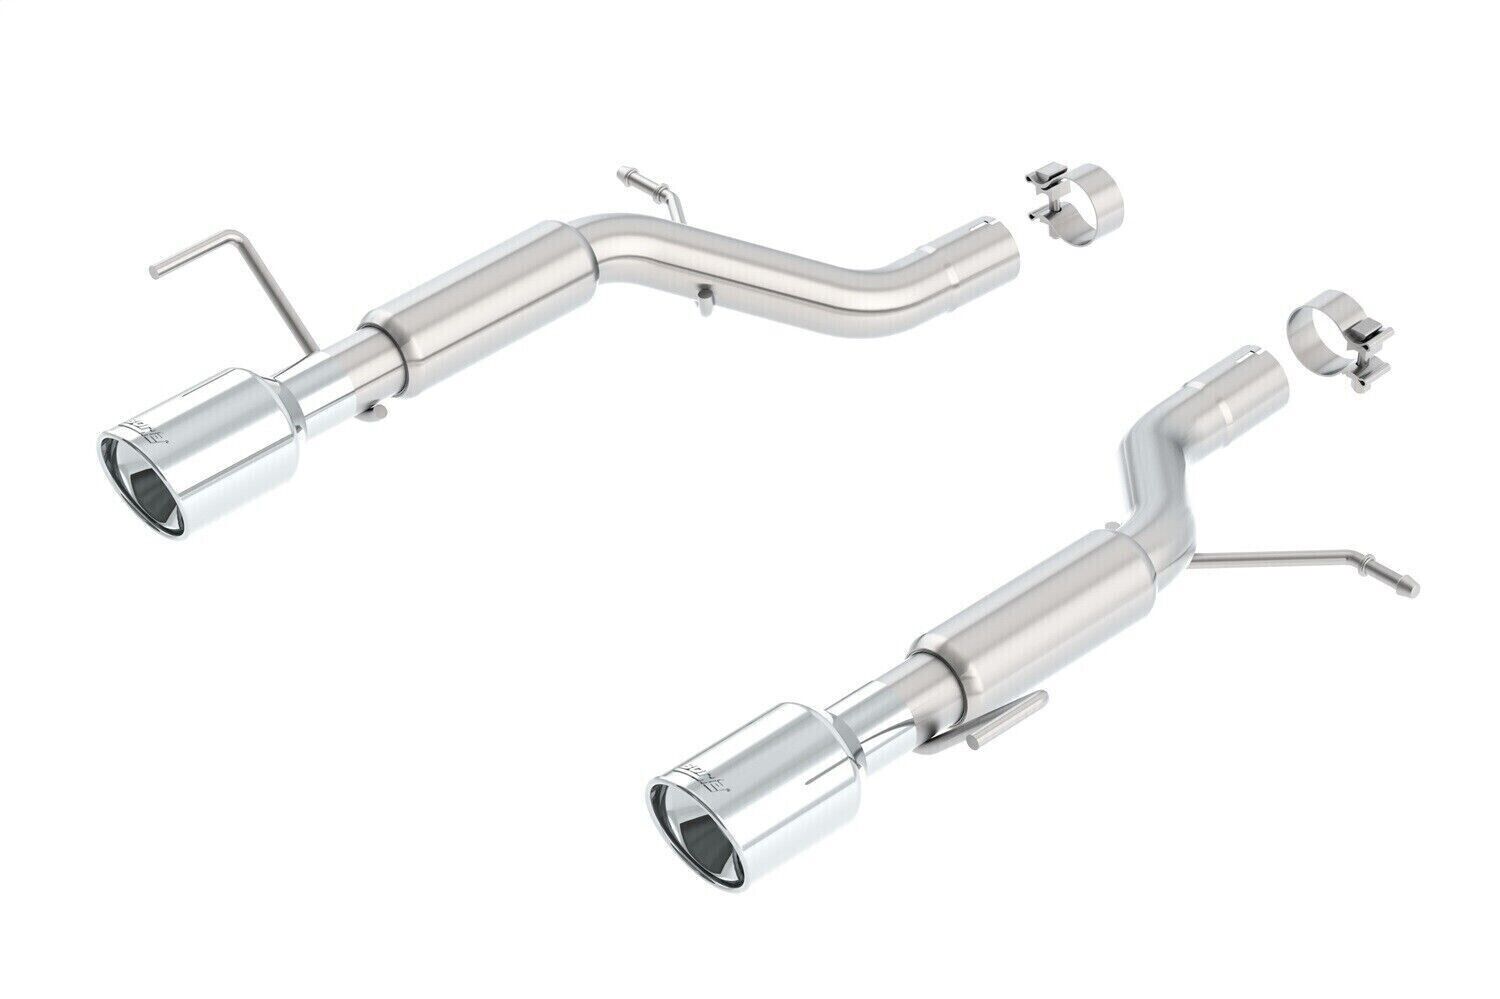 Borla 11844 S-Type Axle-Back Exhaust System Fits 2013-2015 Cadillac ATS